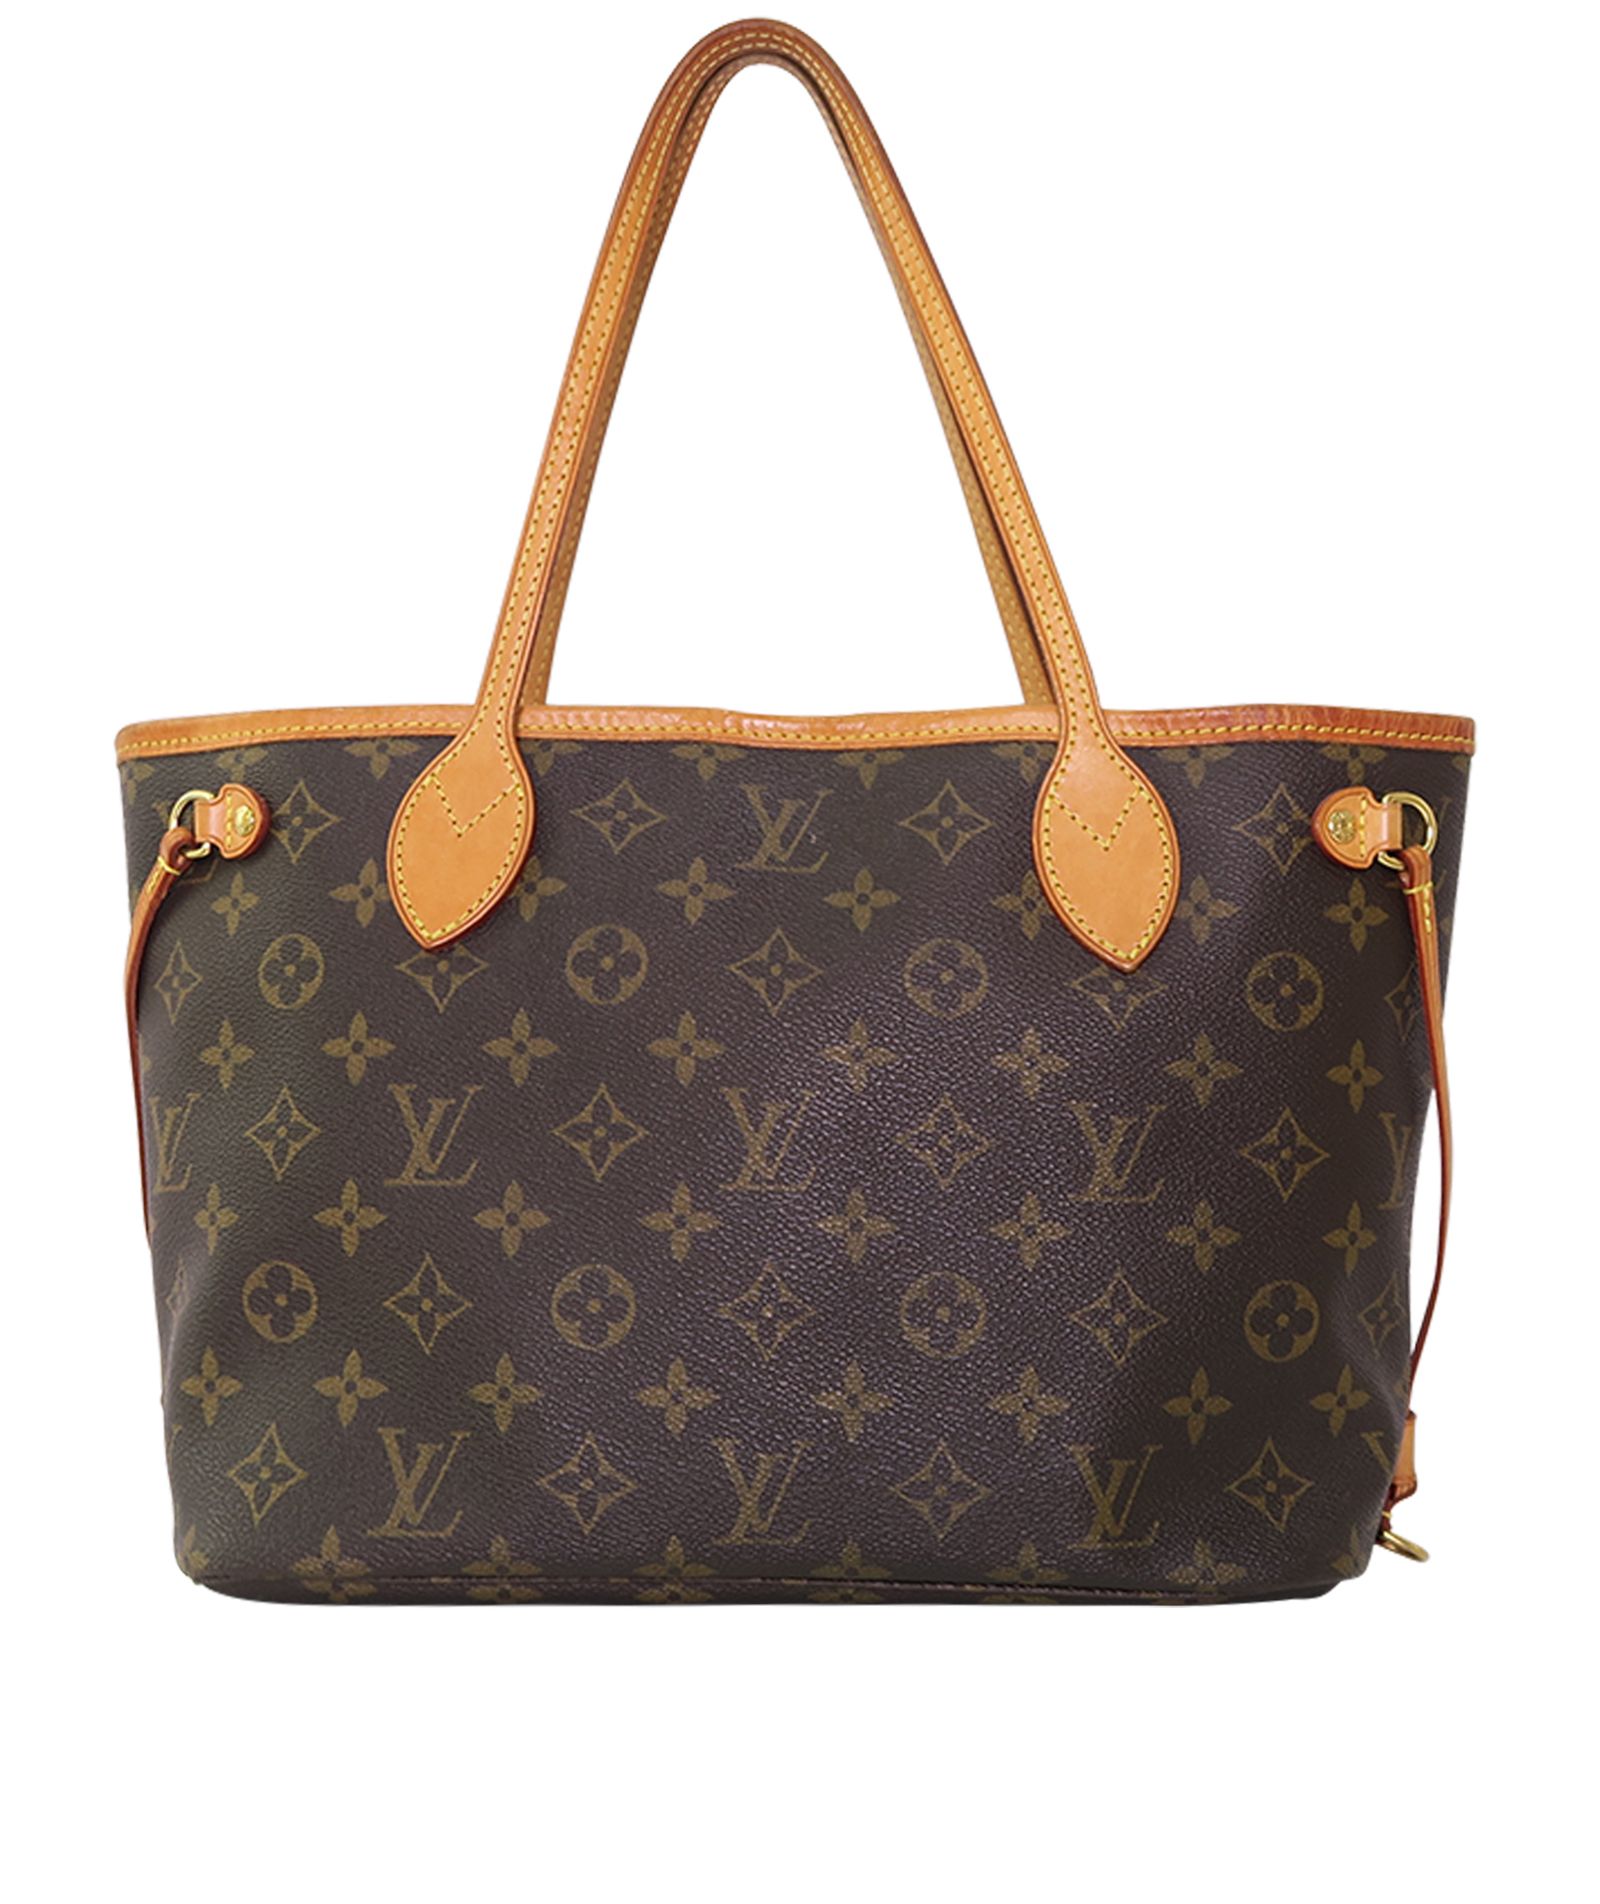 LOUIS VUITTON: WHAT YOU MIGHT NOT KNOW – Siopaella Designer Exchange